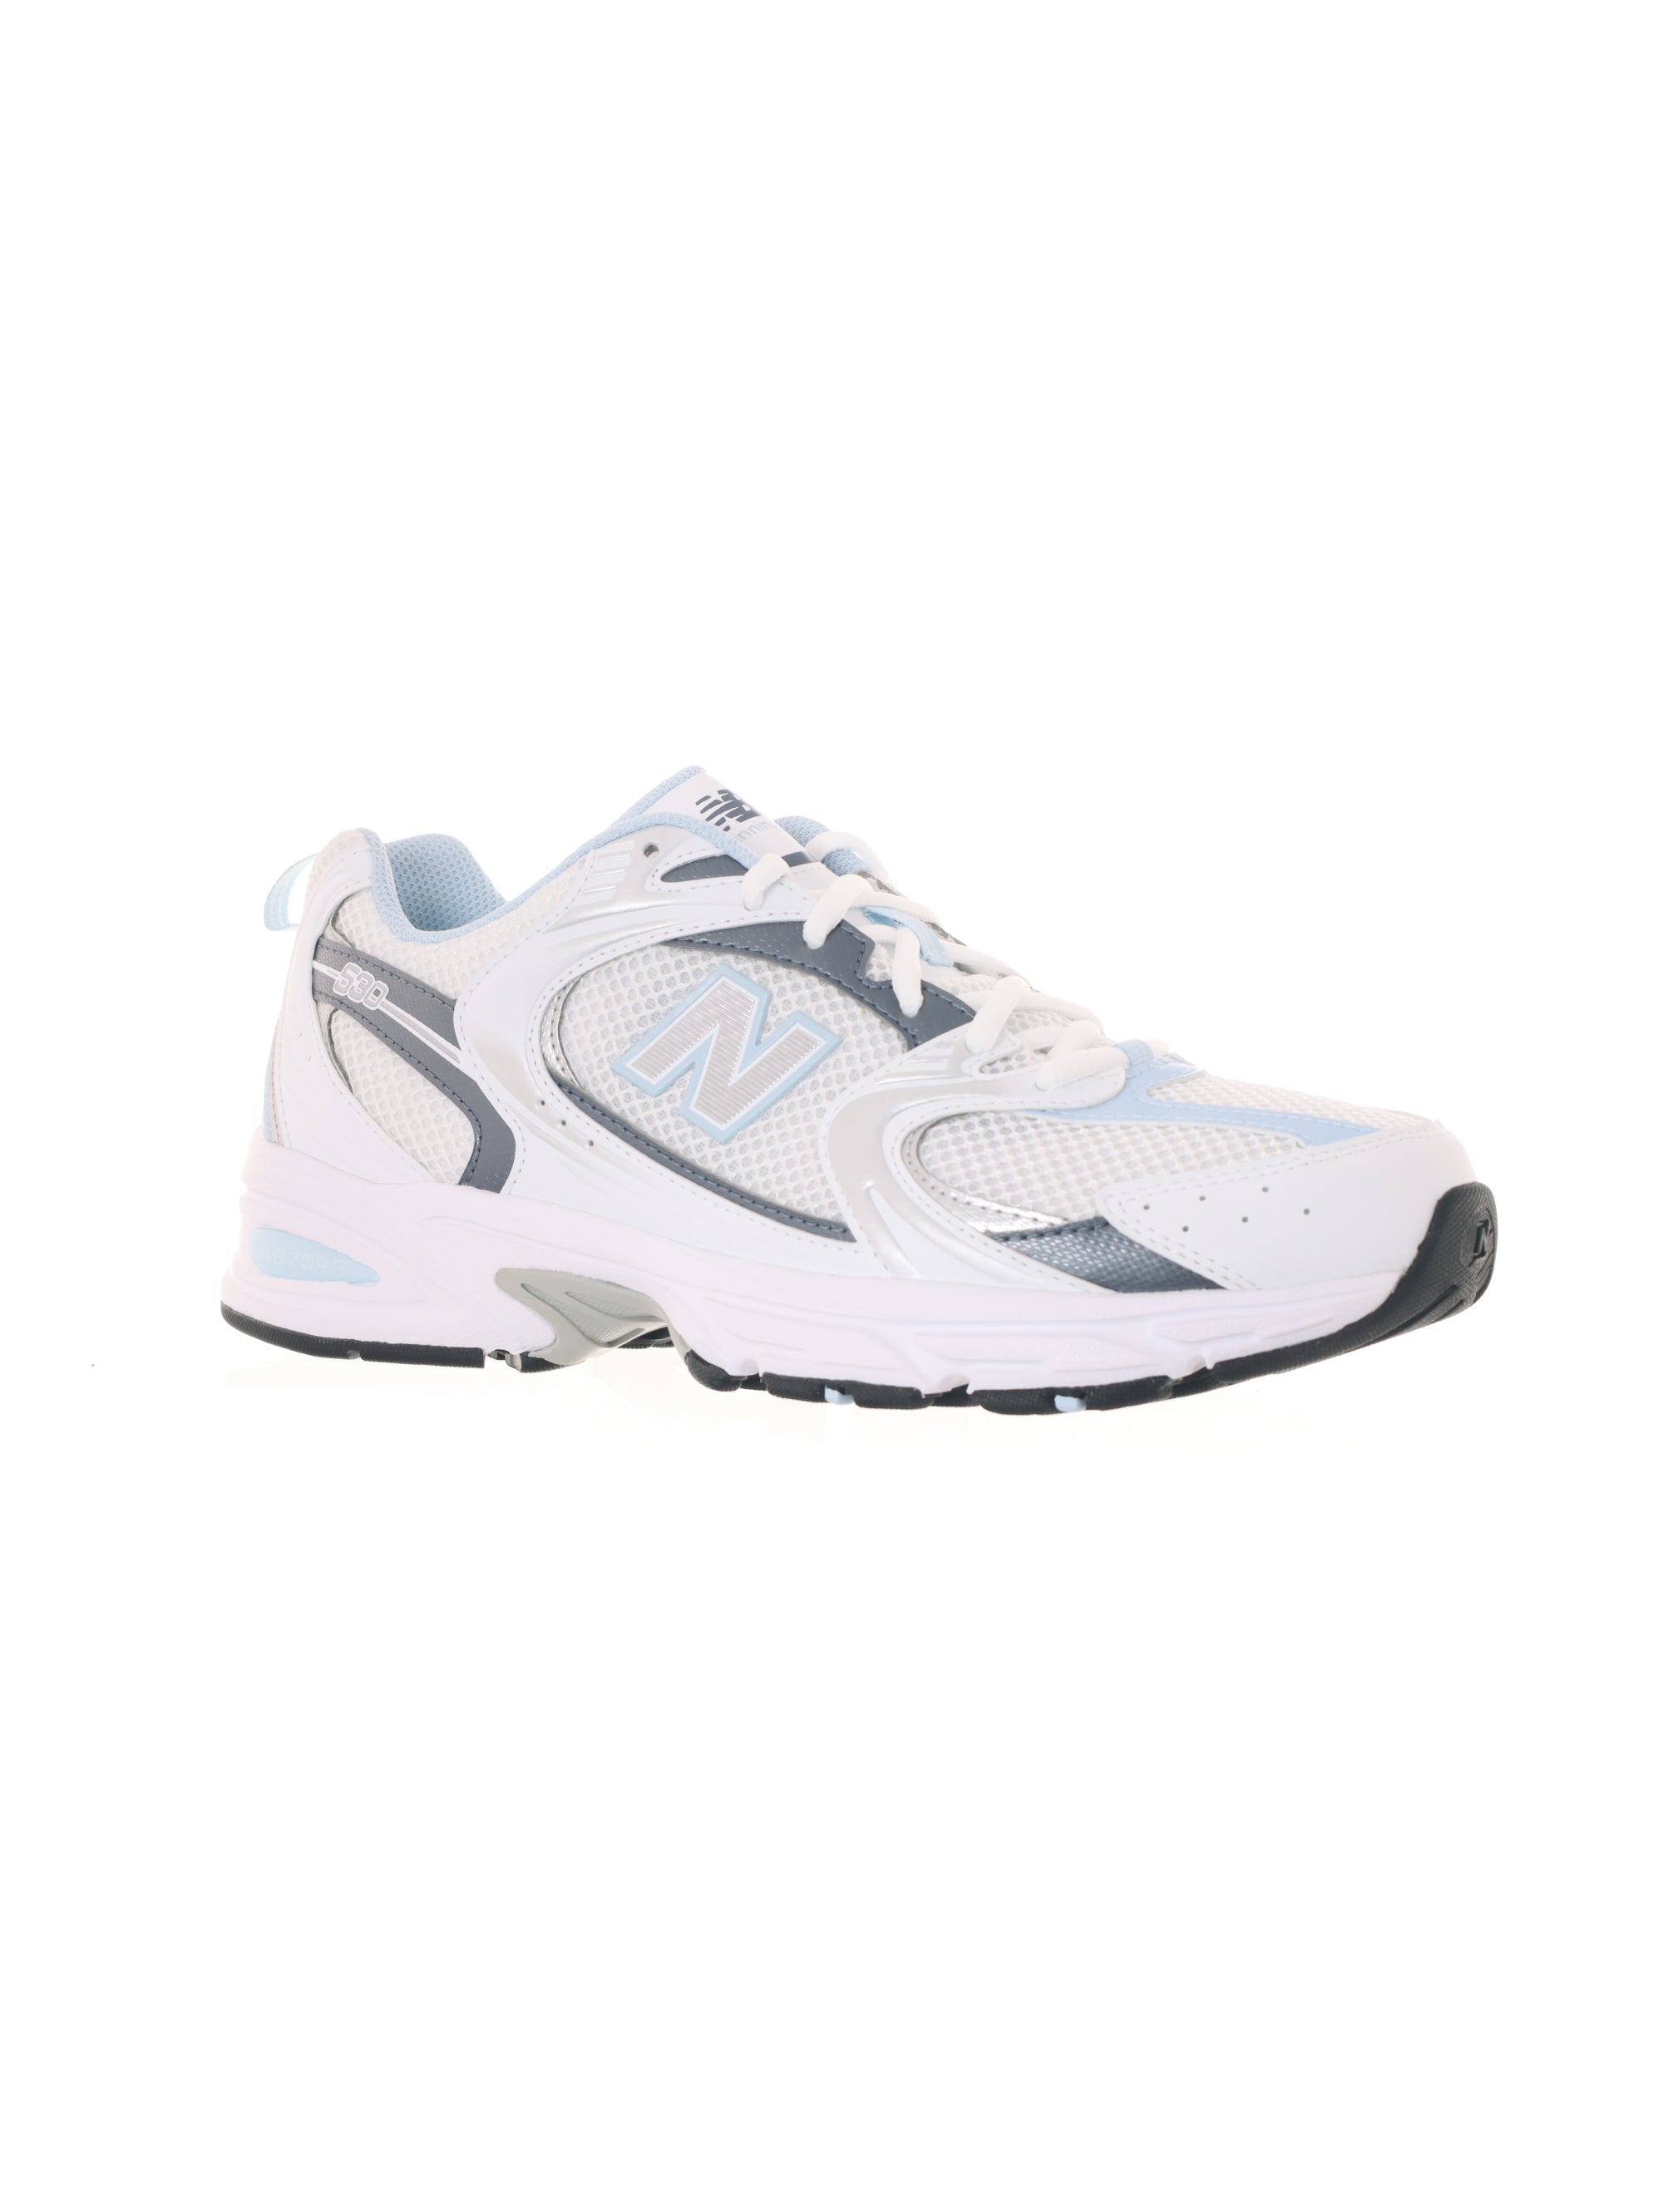 530 Sneakers for Women Lifestyle Reflection White/Blue/Grey